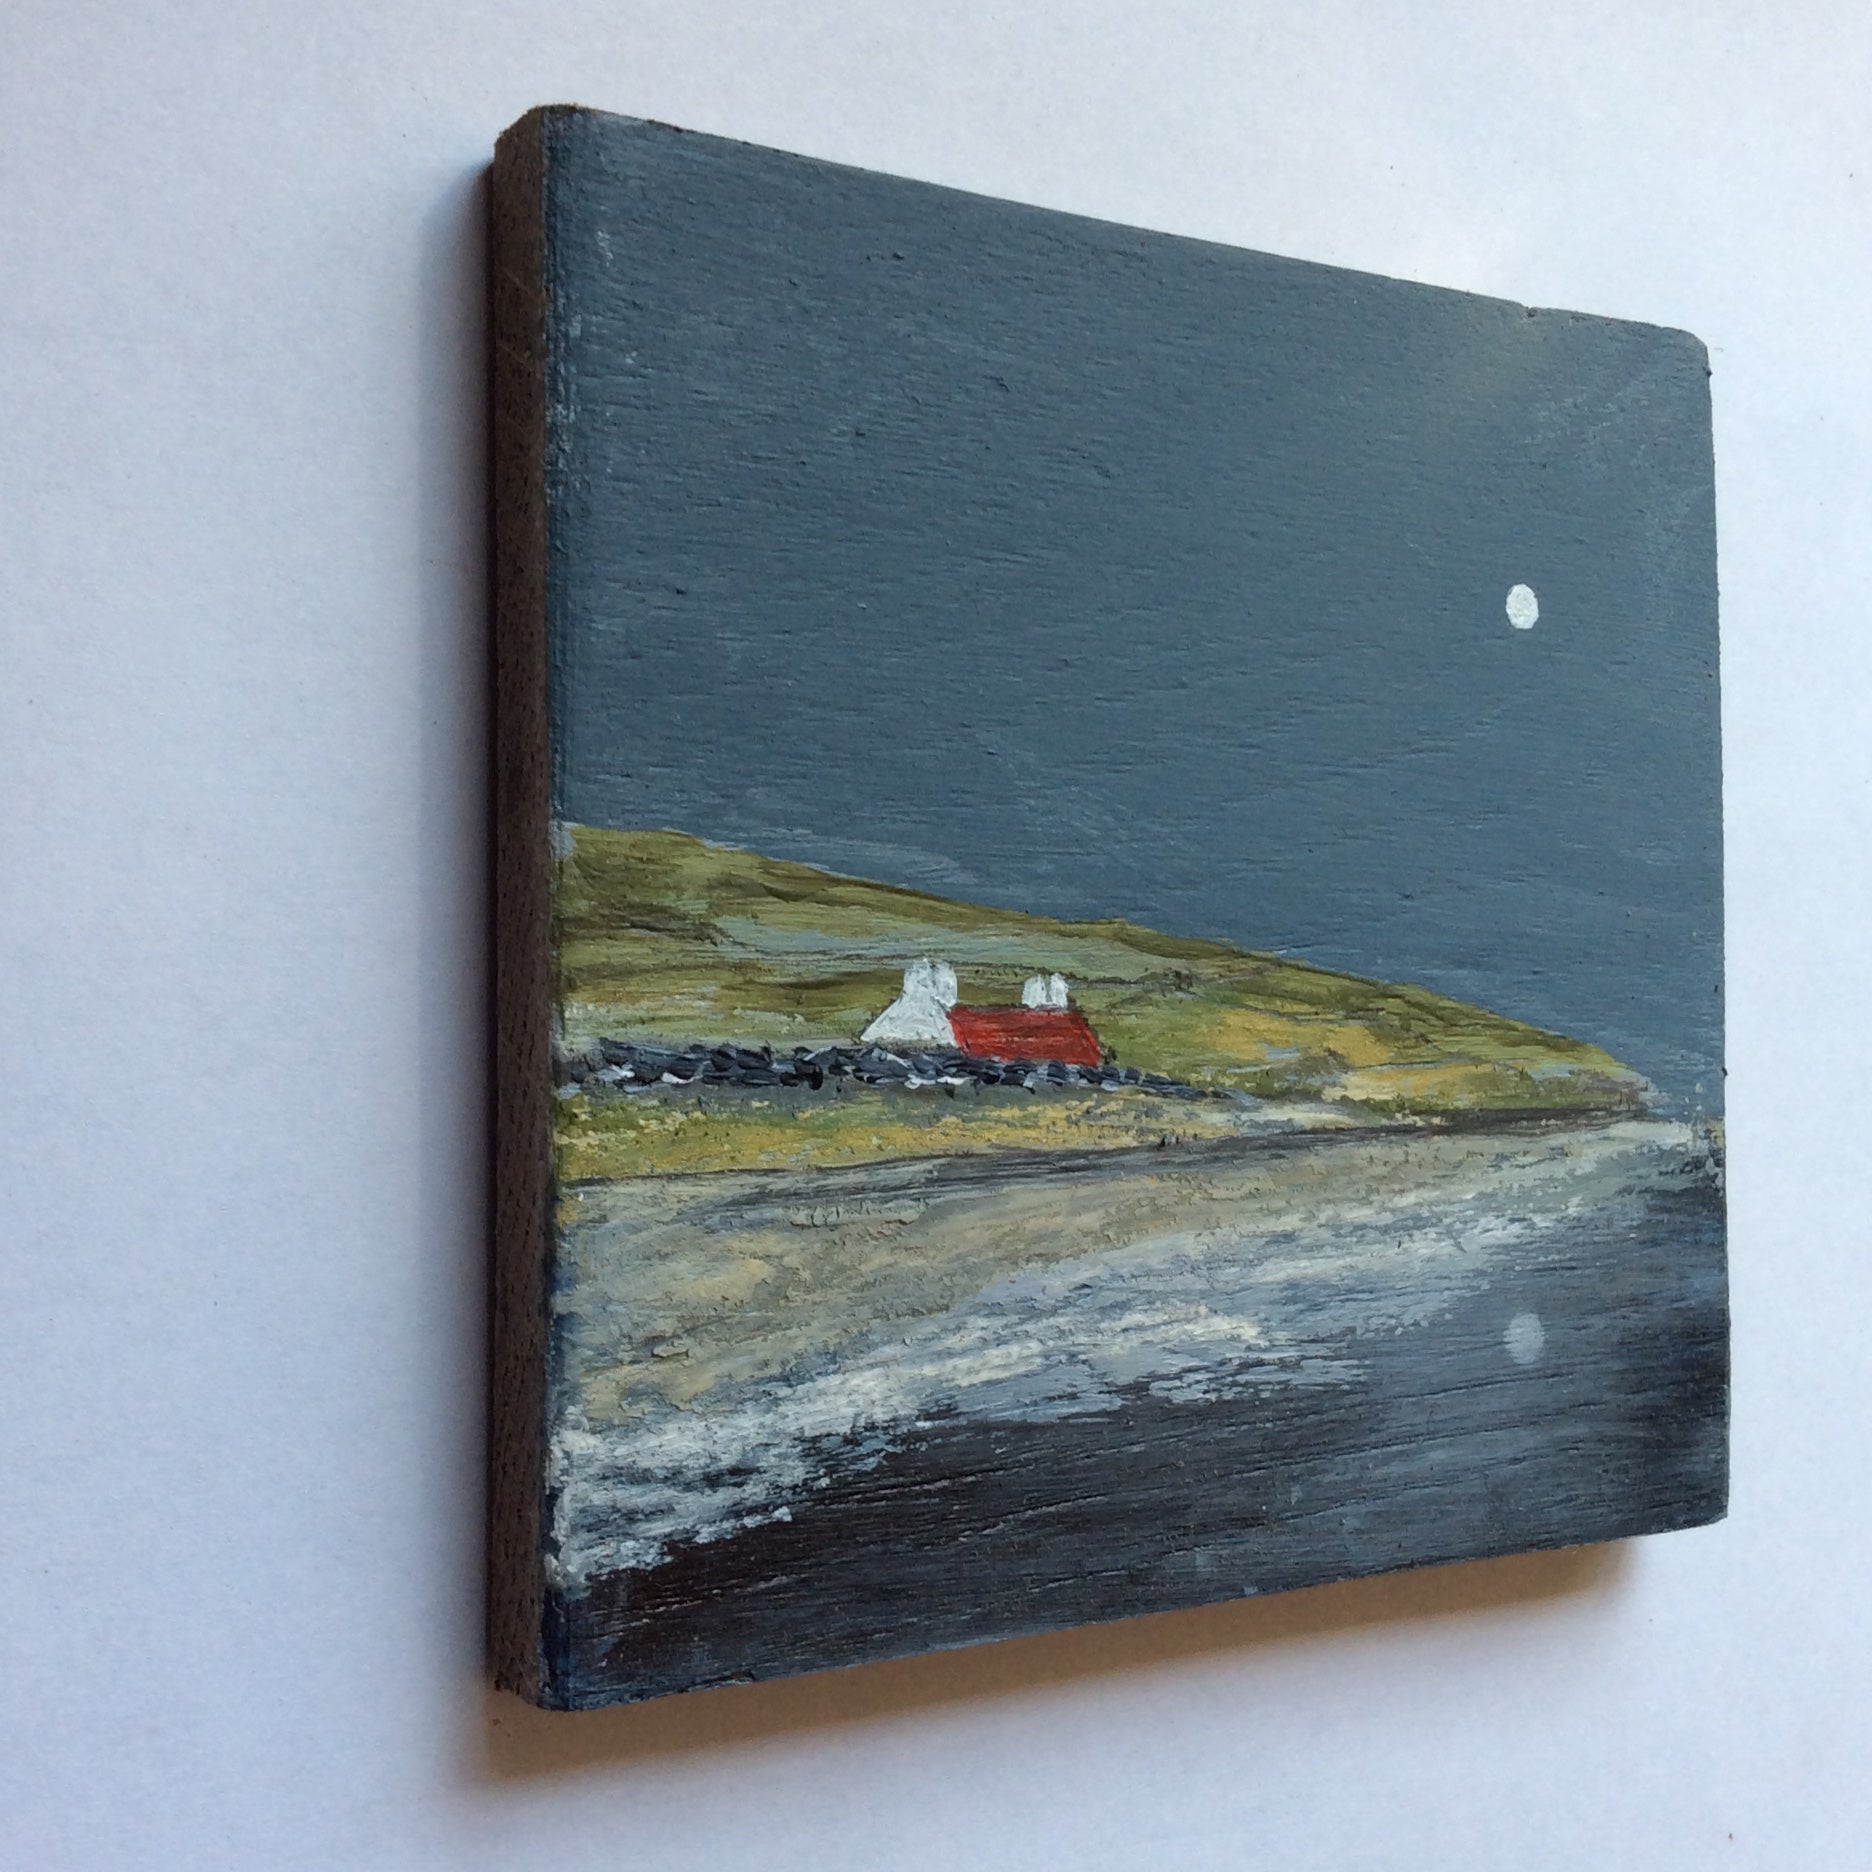 Mixed Media Art on wood By Louise O'Hara - "Hilltop Croft”